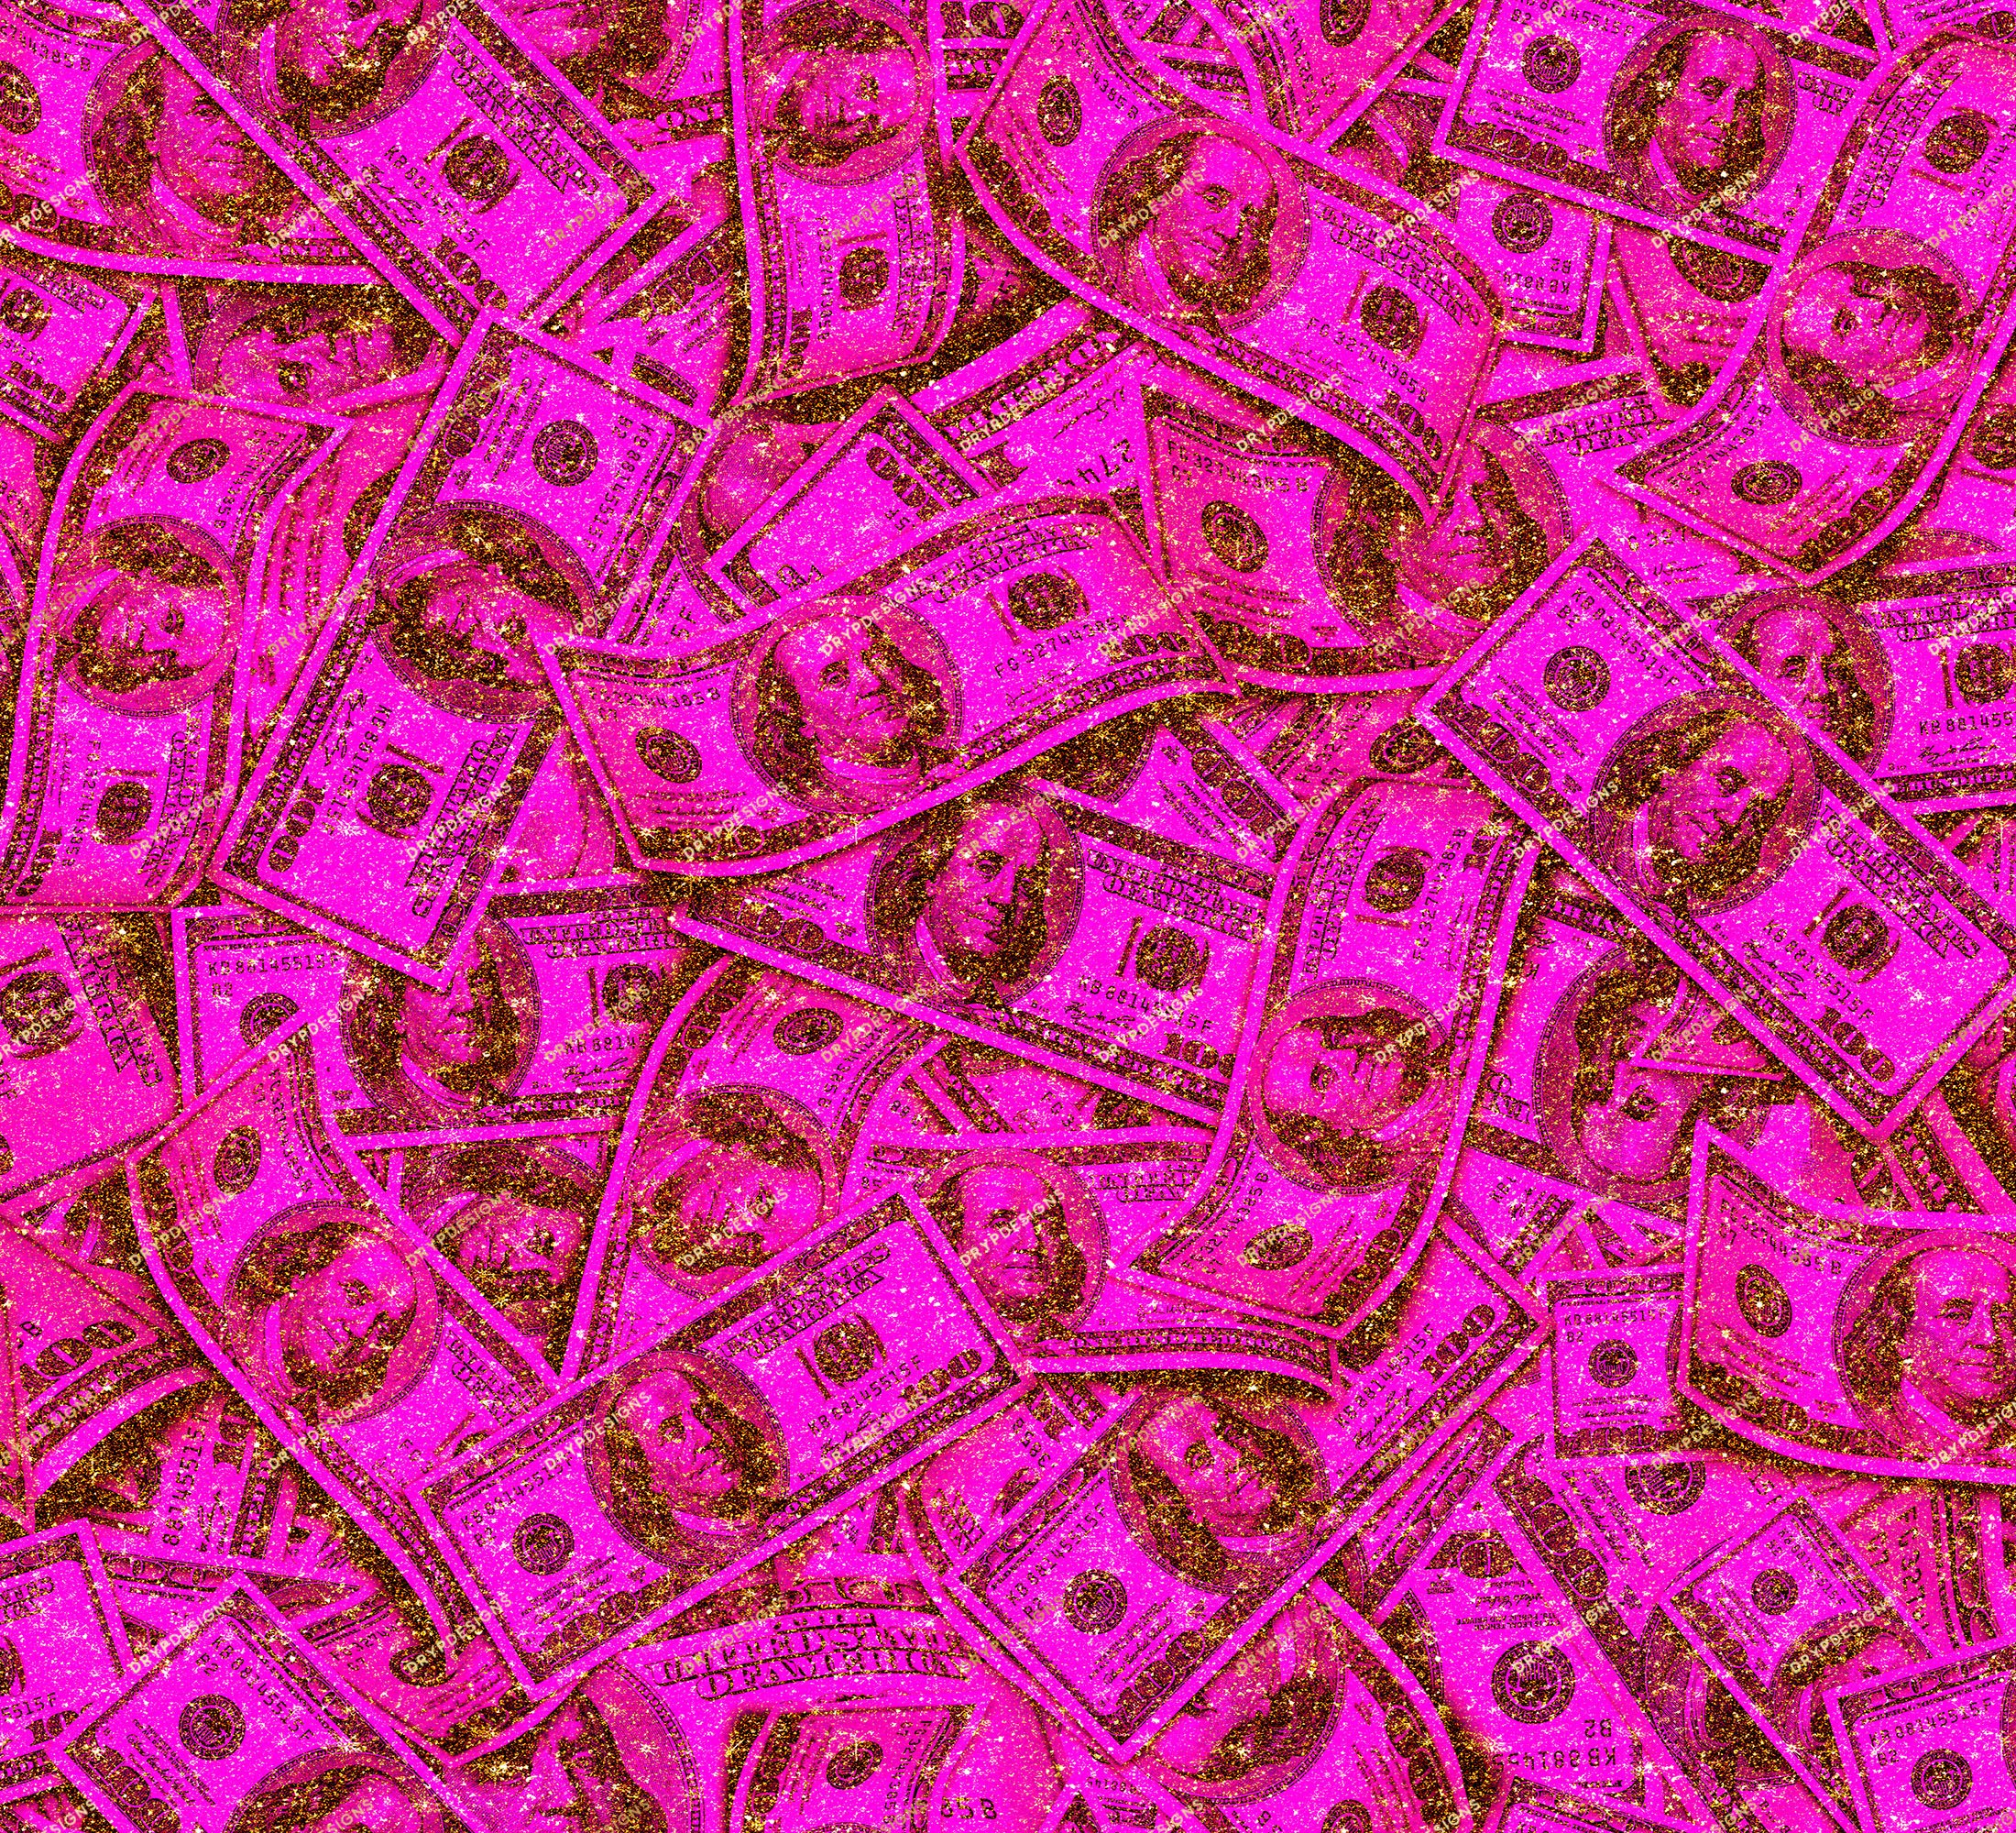 Money Backgrounds and Wallpapers